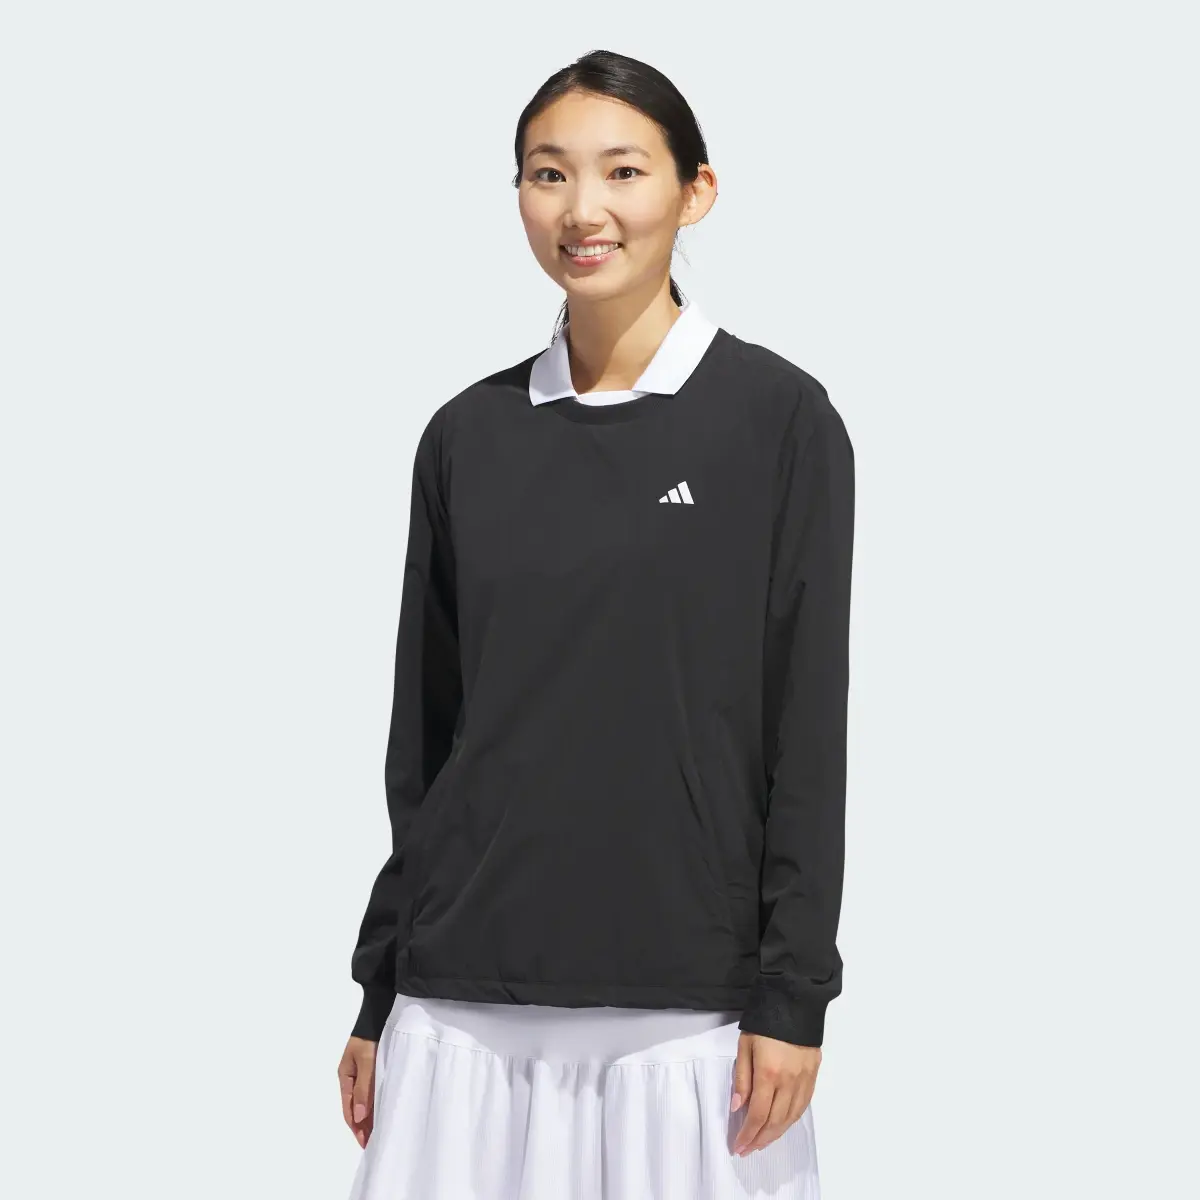 Adidas Ultimate365 Tour WIND.RDY Pullover Sweatshirt. 2